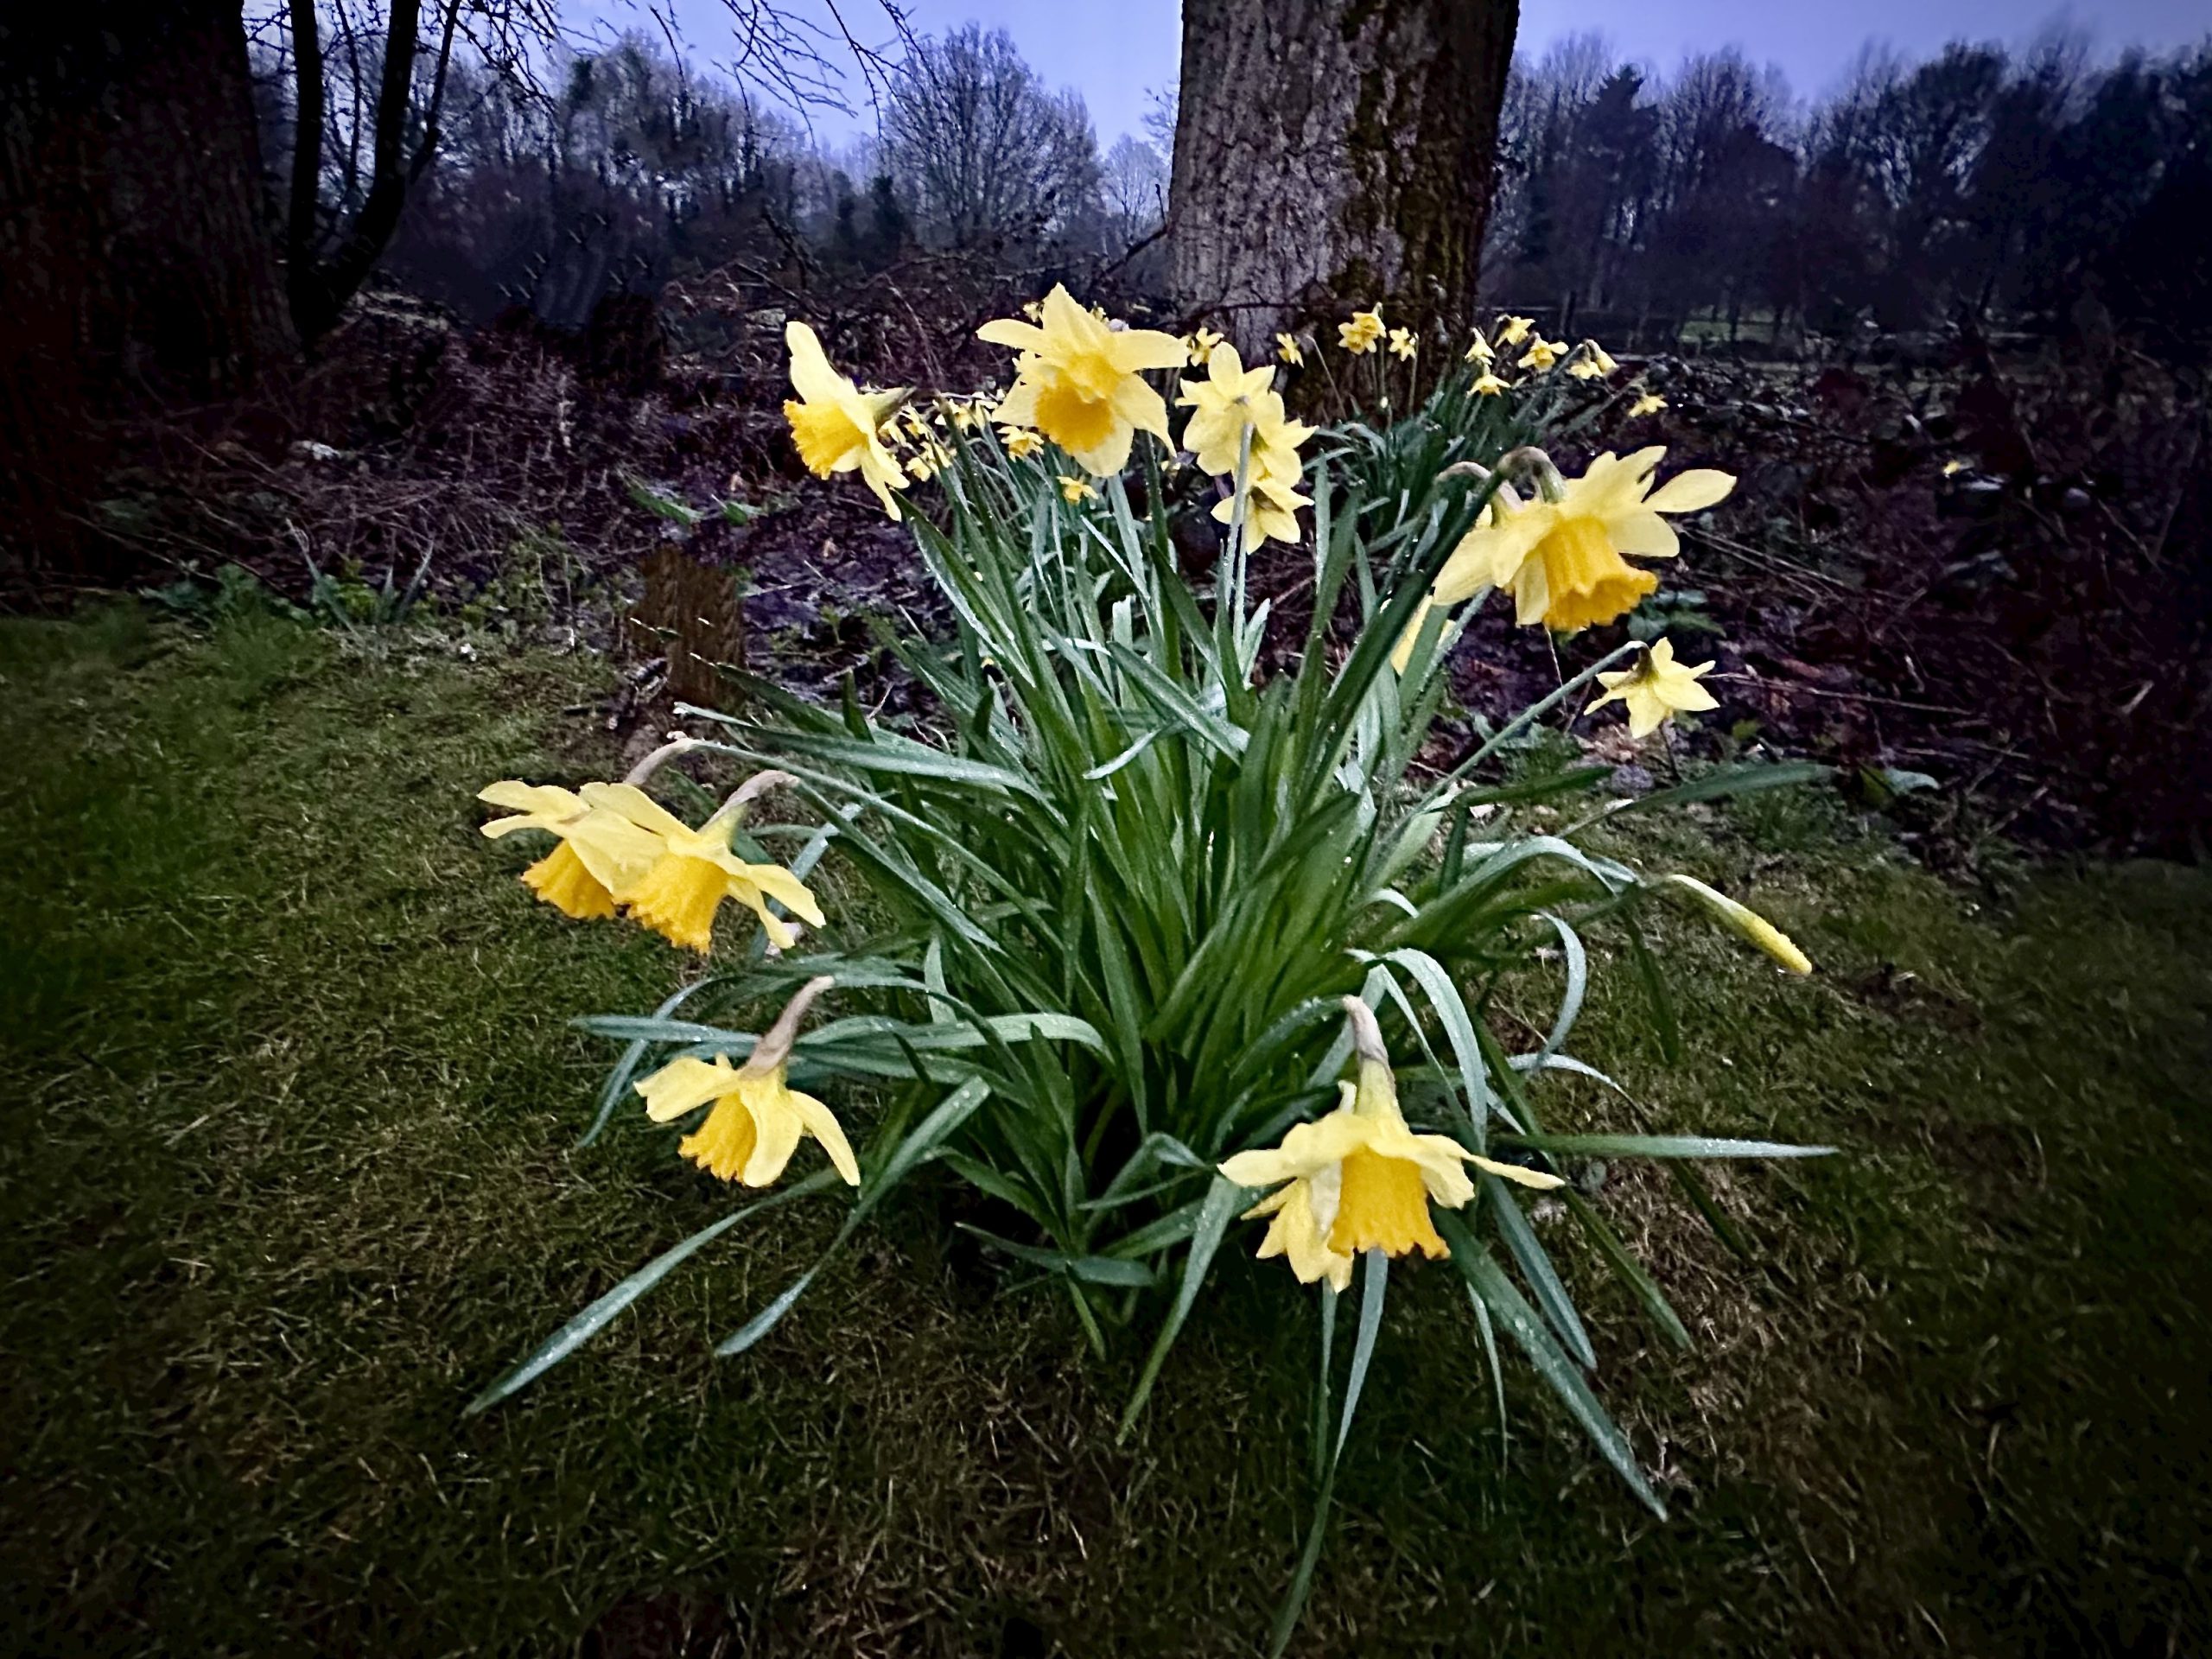 Day 79.4 – Dafs in the gloaming